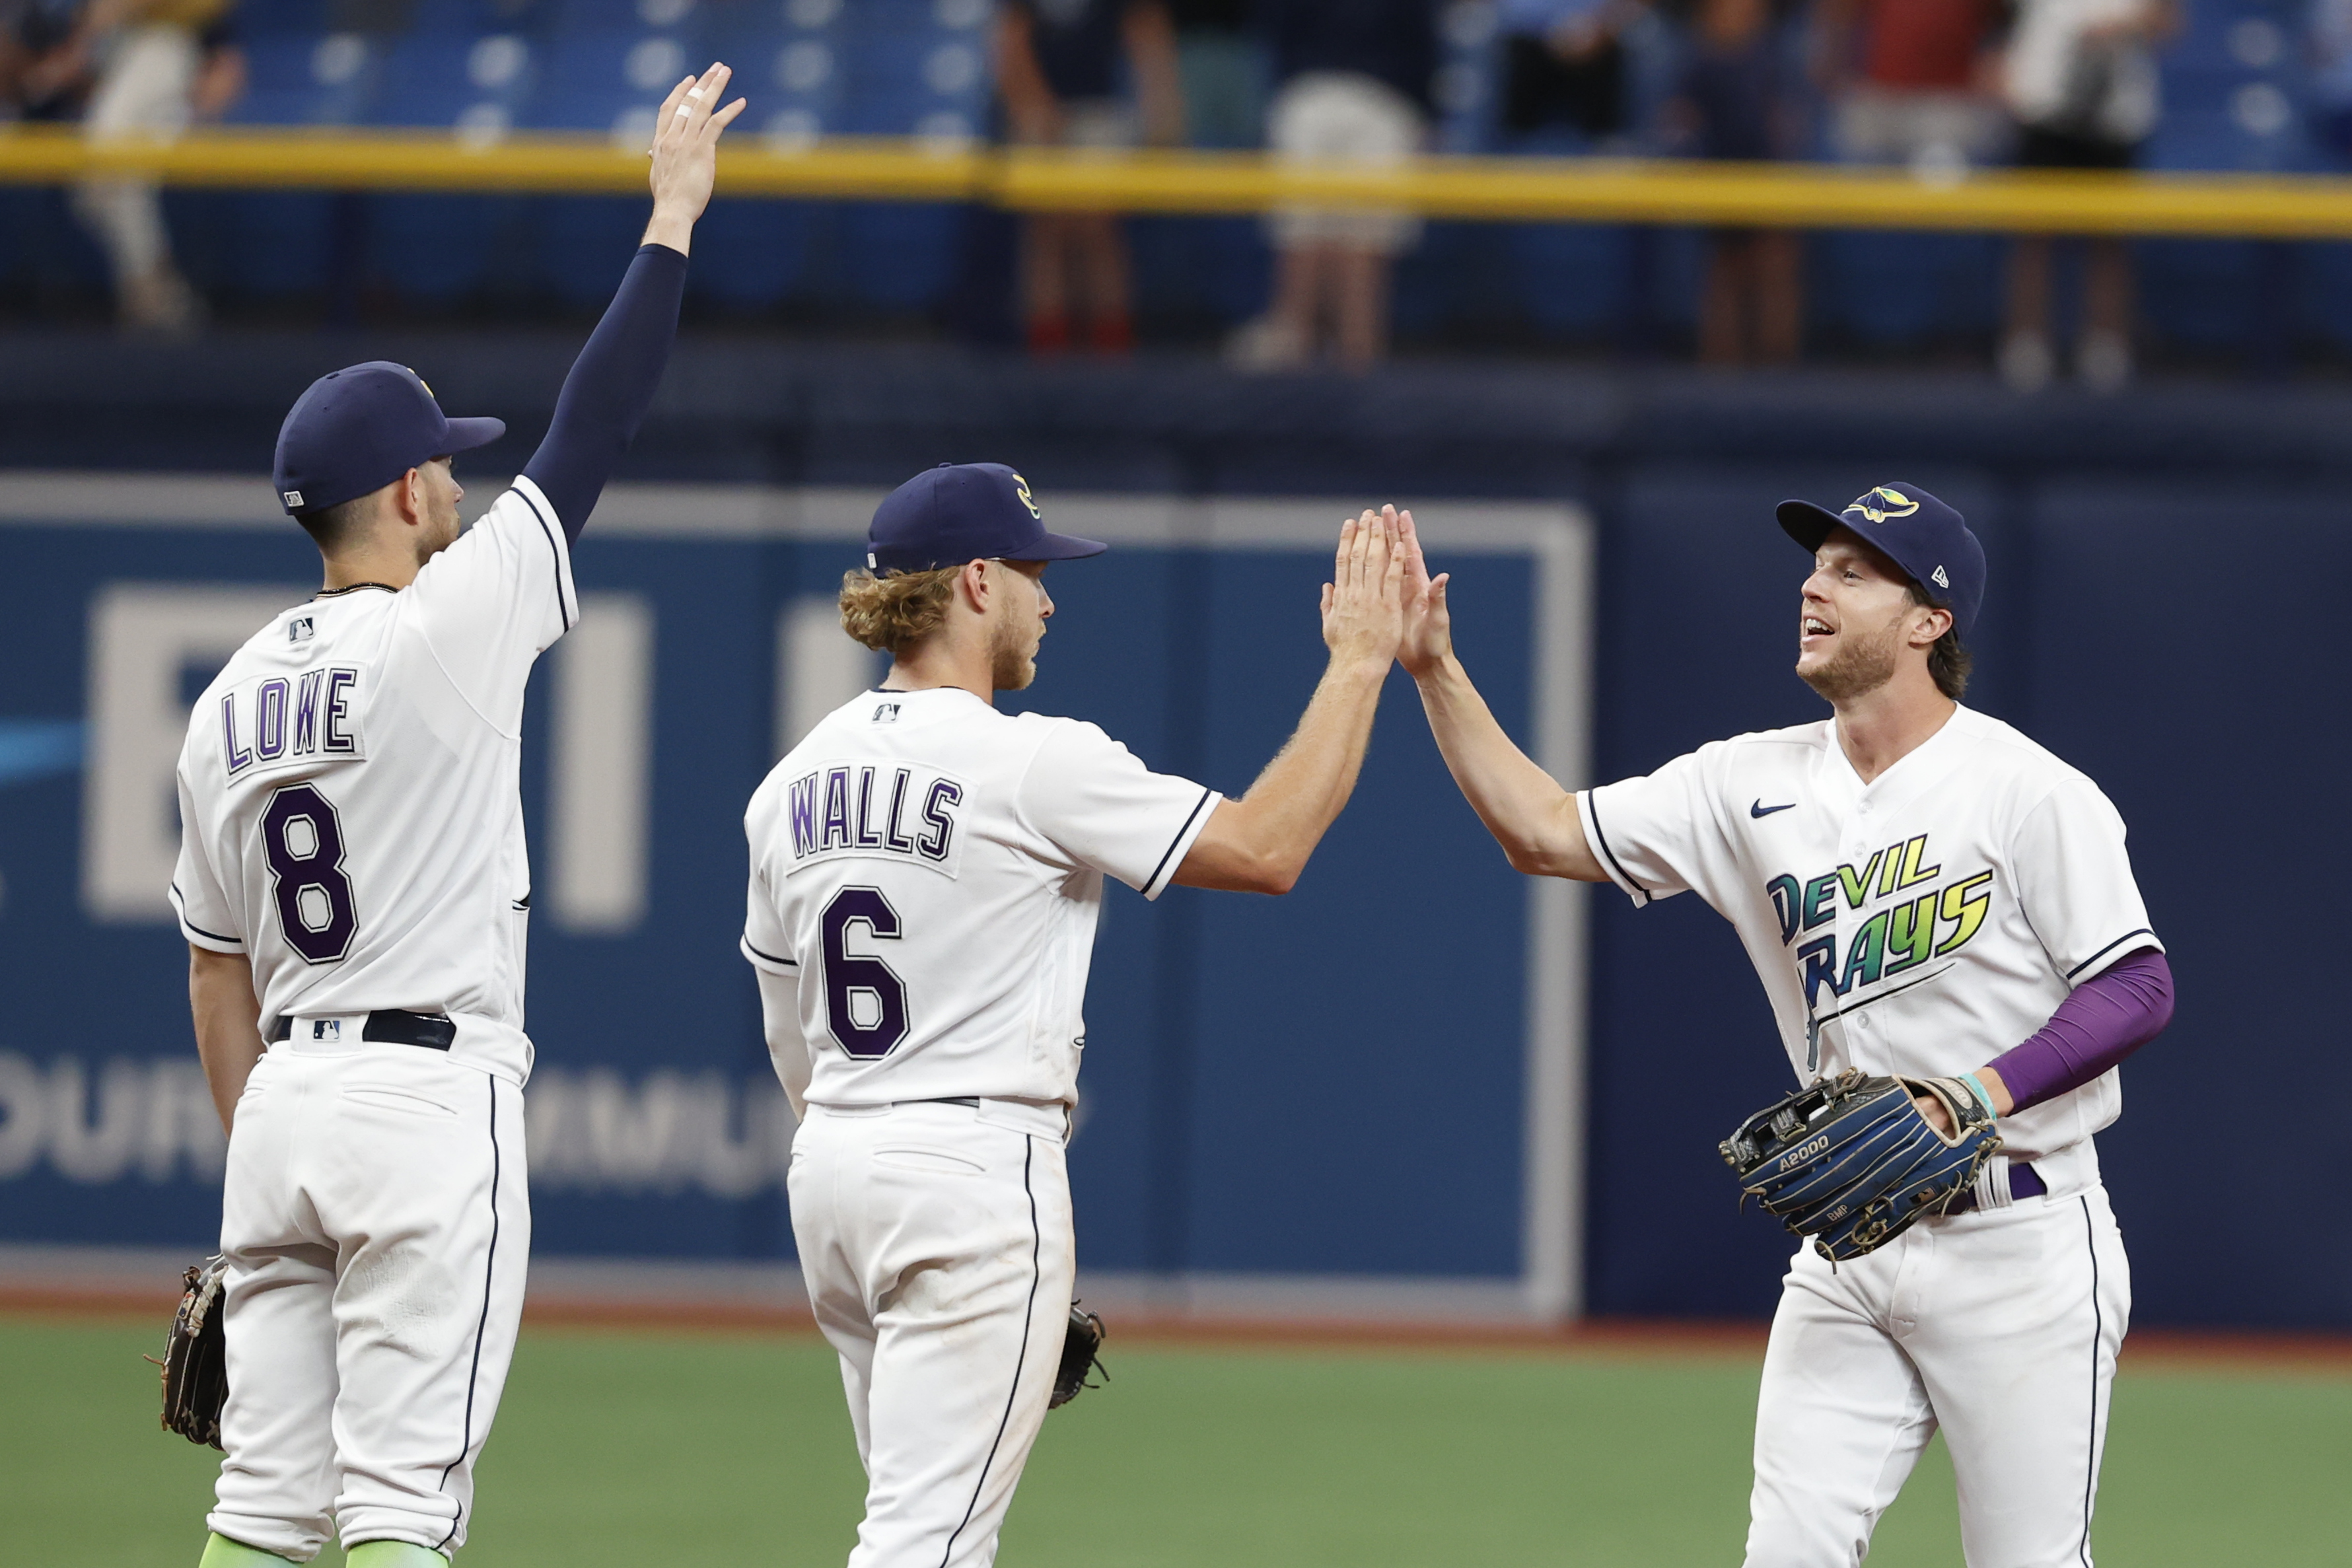 Triple-A Bulls Beat Tampa Bay Devil Rays During Exhibition Game